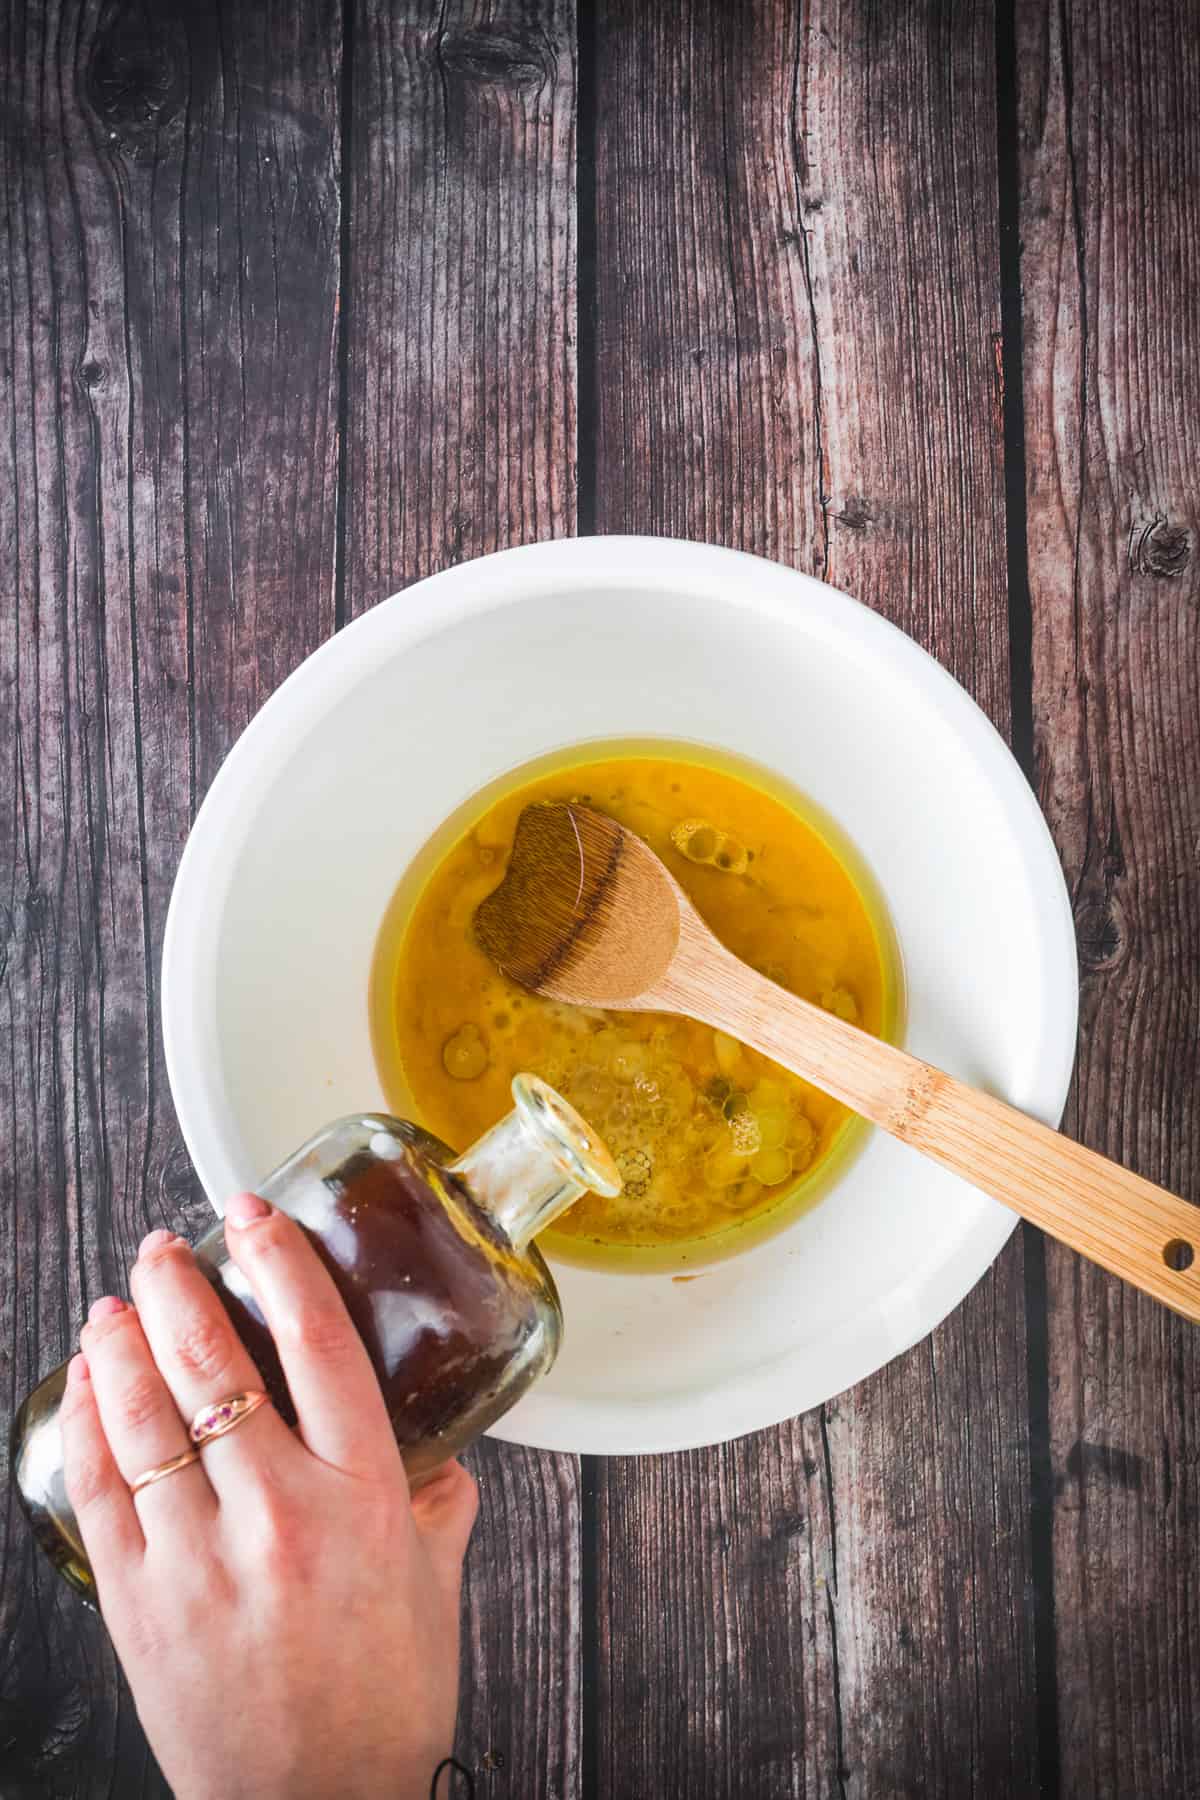 A person pouring oil into a bowl with a honey and Bocadillo Guava mixture, using a wooden spoon for stirring, on a rustic wooden surface.